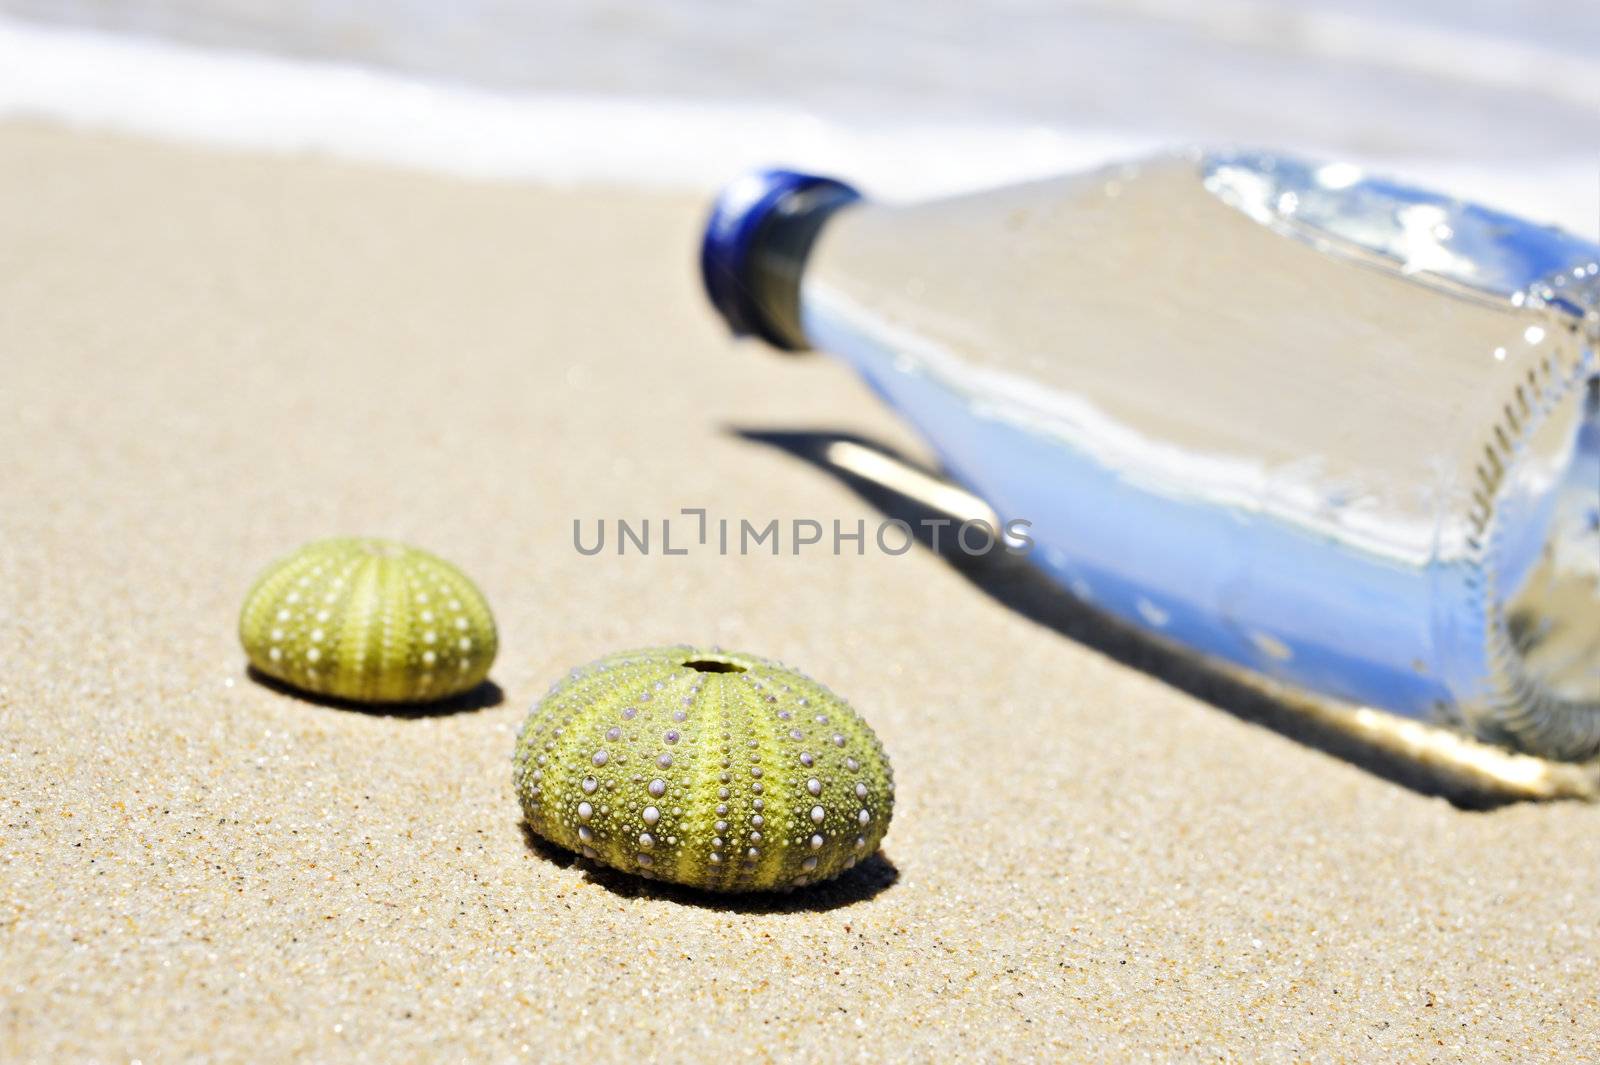 Beach scene with two dead sea urchin shells and a bottle of water by tish1